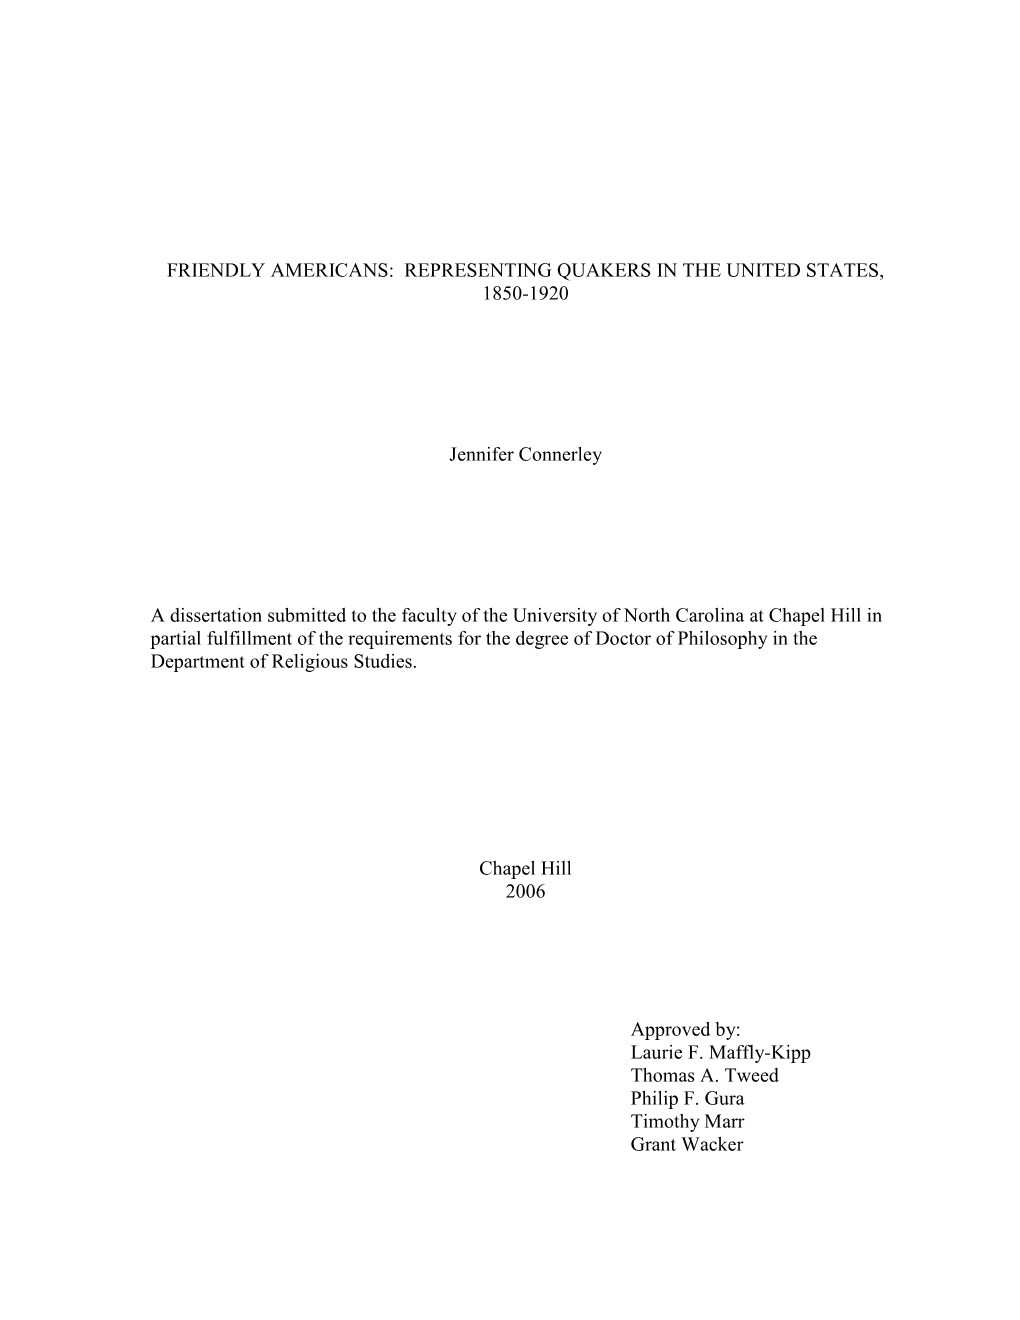 REPRESENTING QUAKERS in the UNITED STATES, 1850-1920 Jennifer Connerley a Dissertation Submitted to The